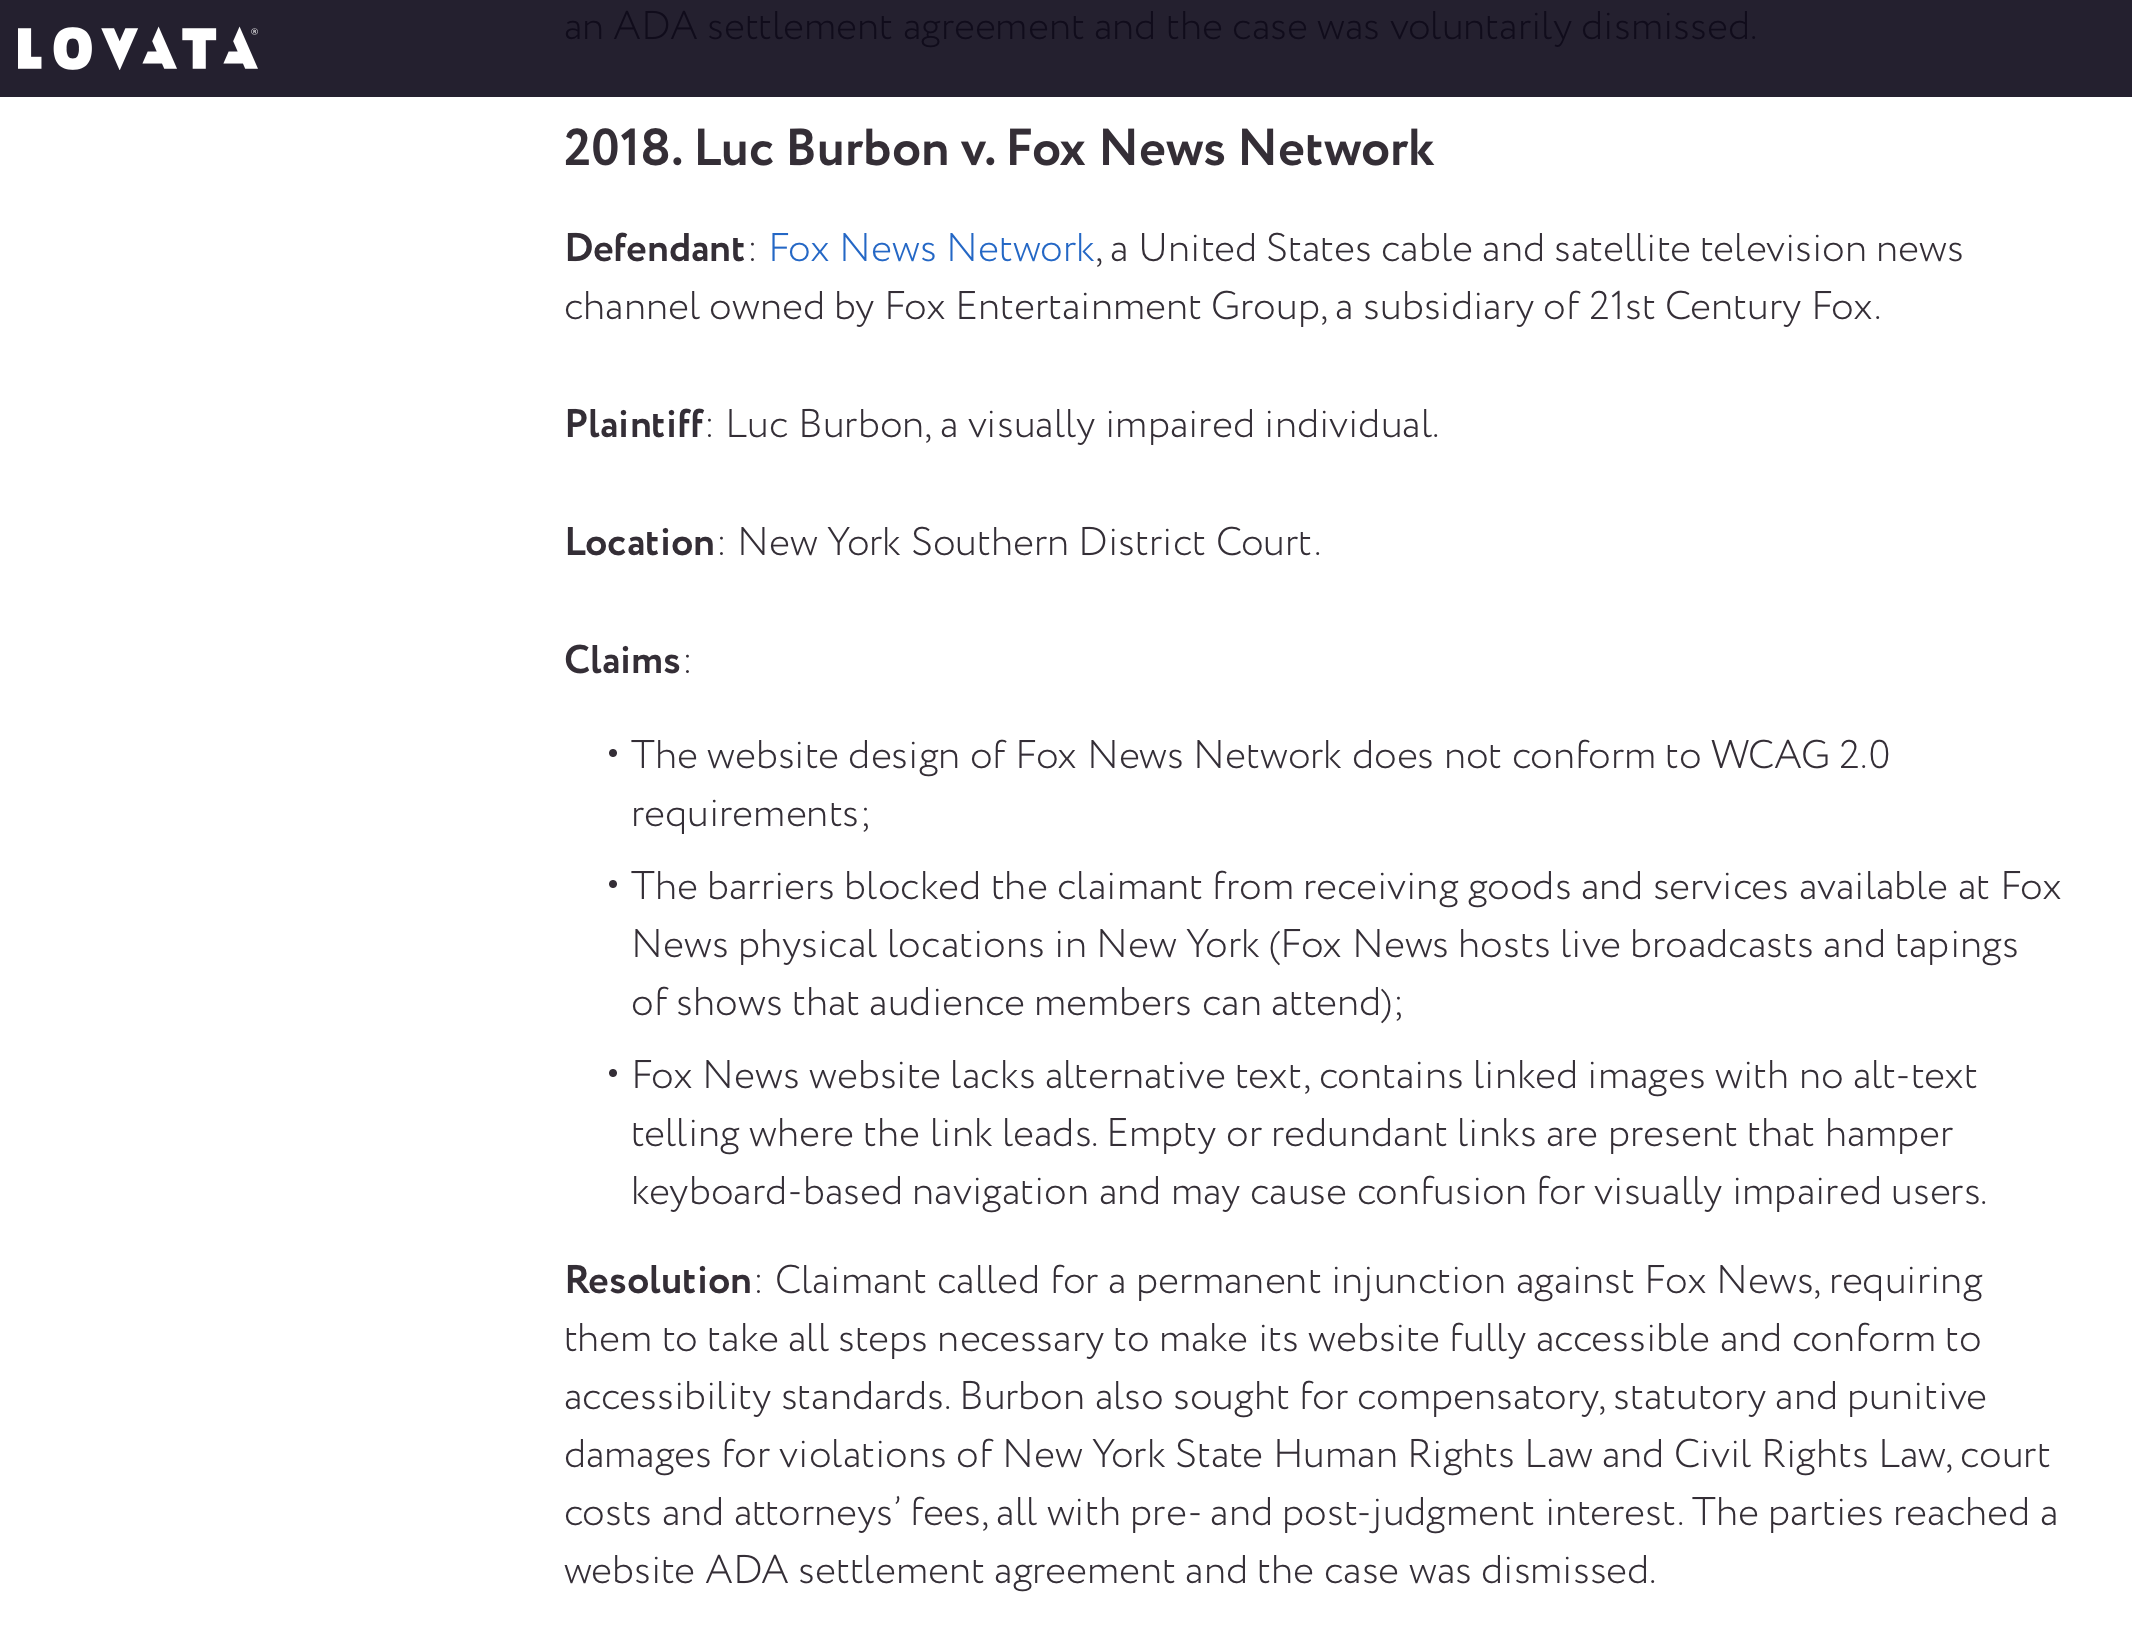 article about Fox News network  website accessibility lawsuit